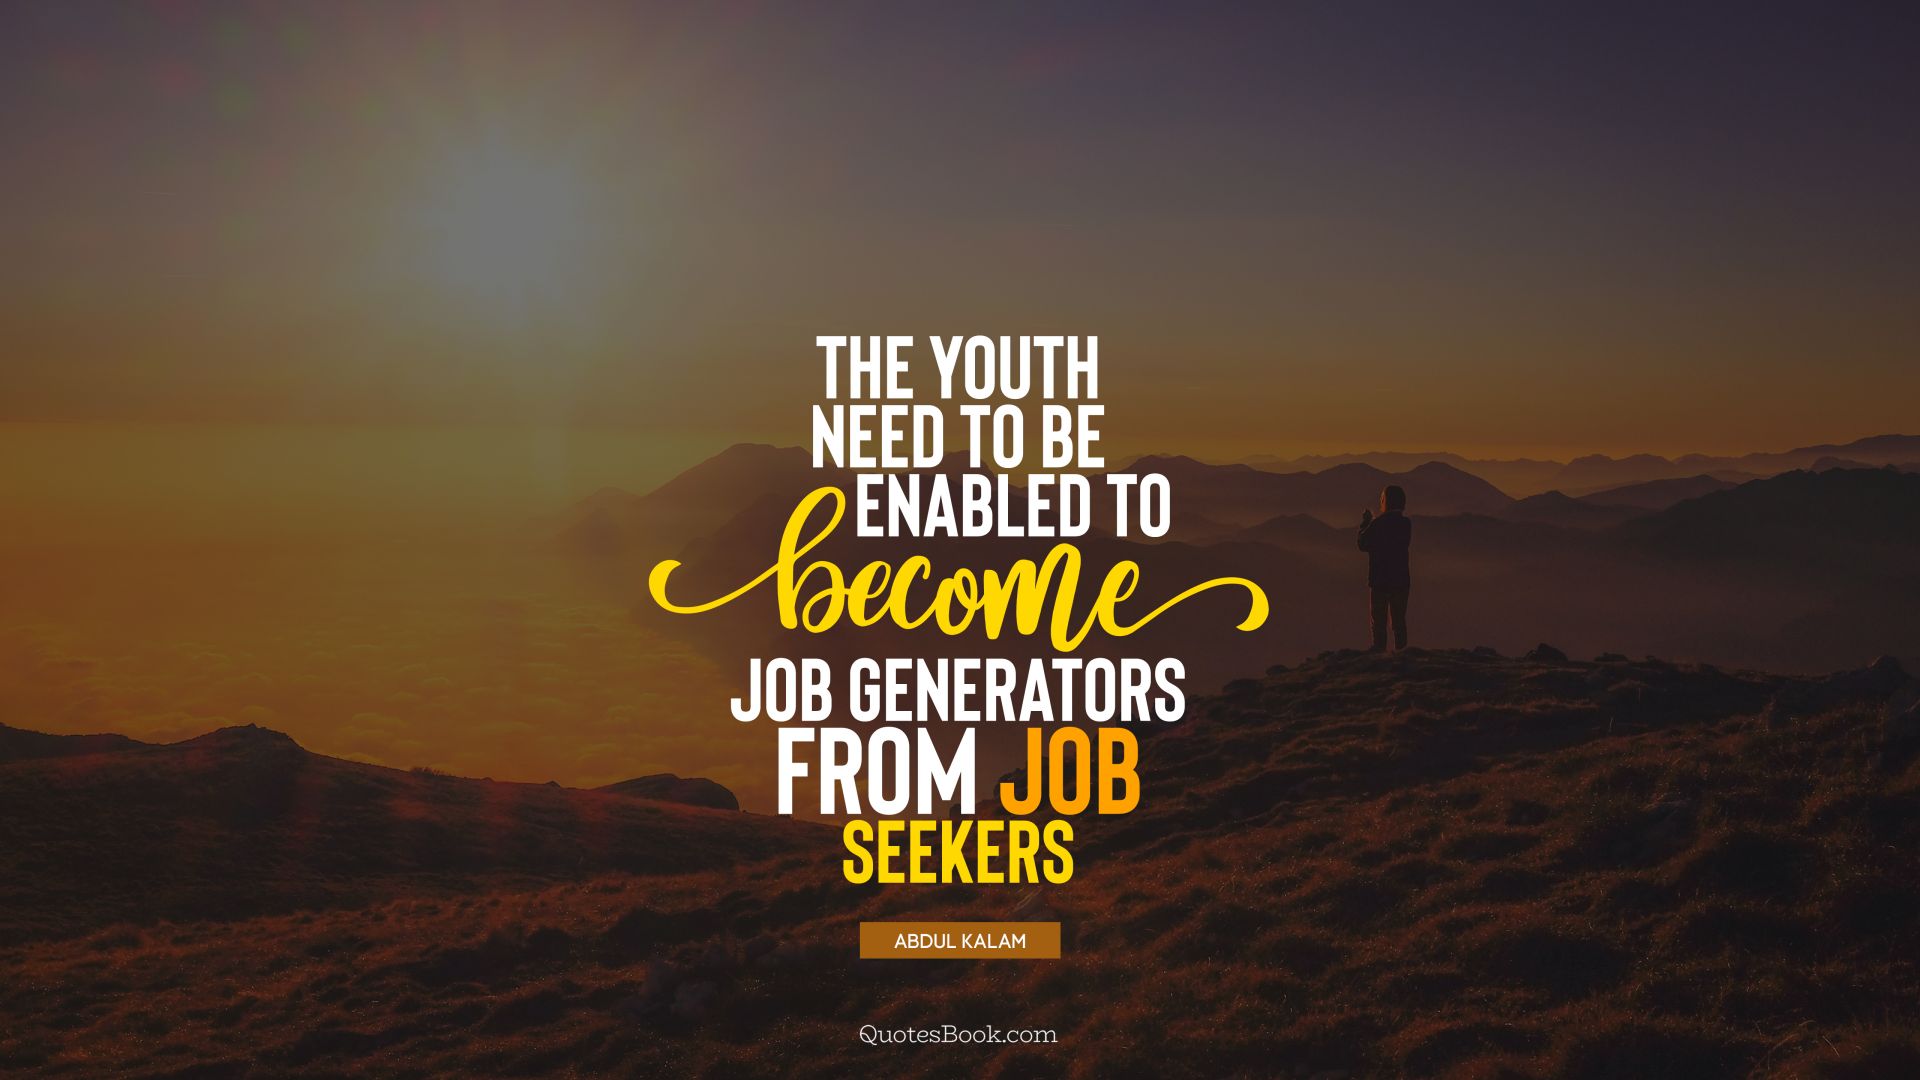 The youth need to be enabled to become job generators from job seekers. - Quote by Abdul Kalam